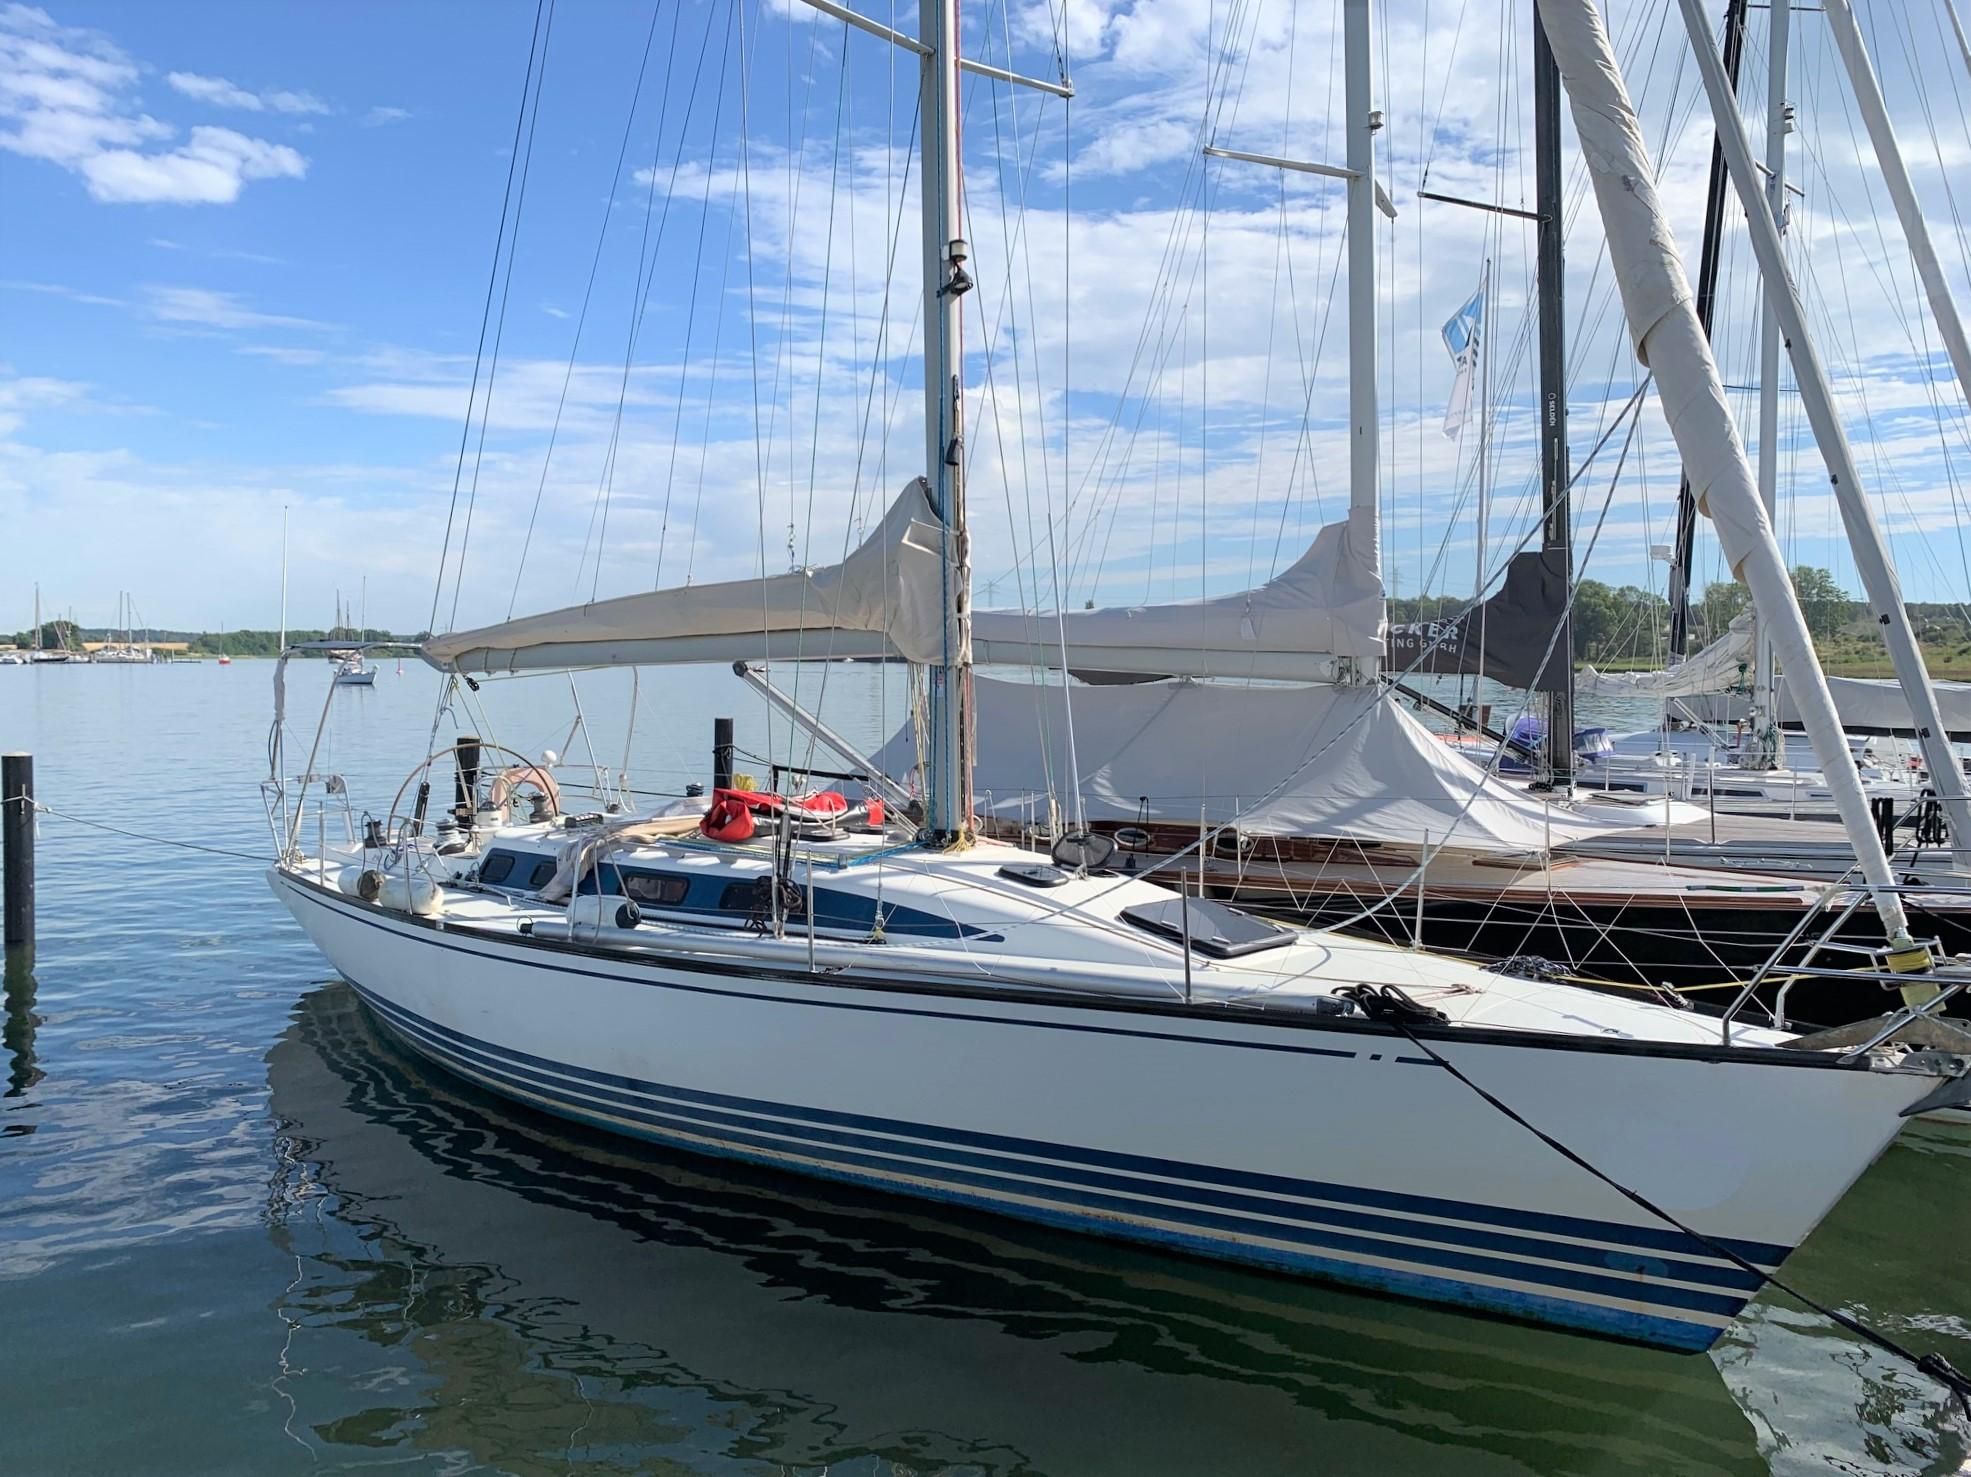 x412 yacht for sale